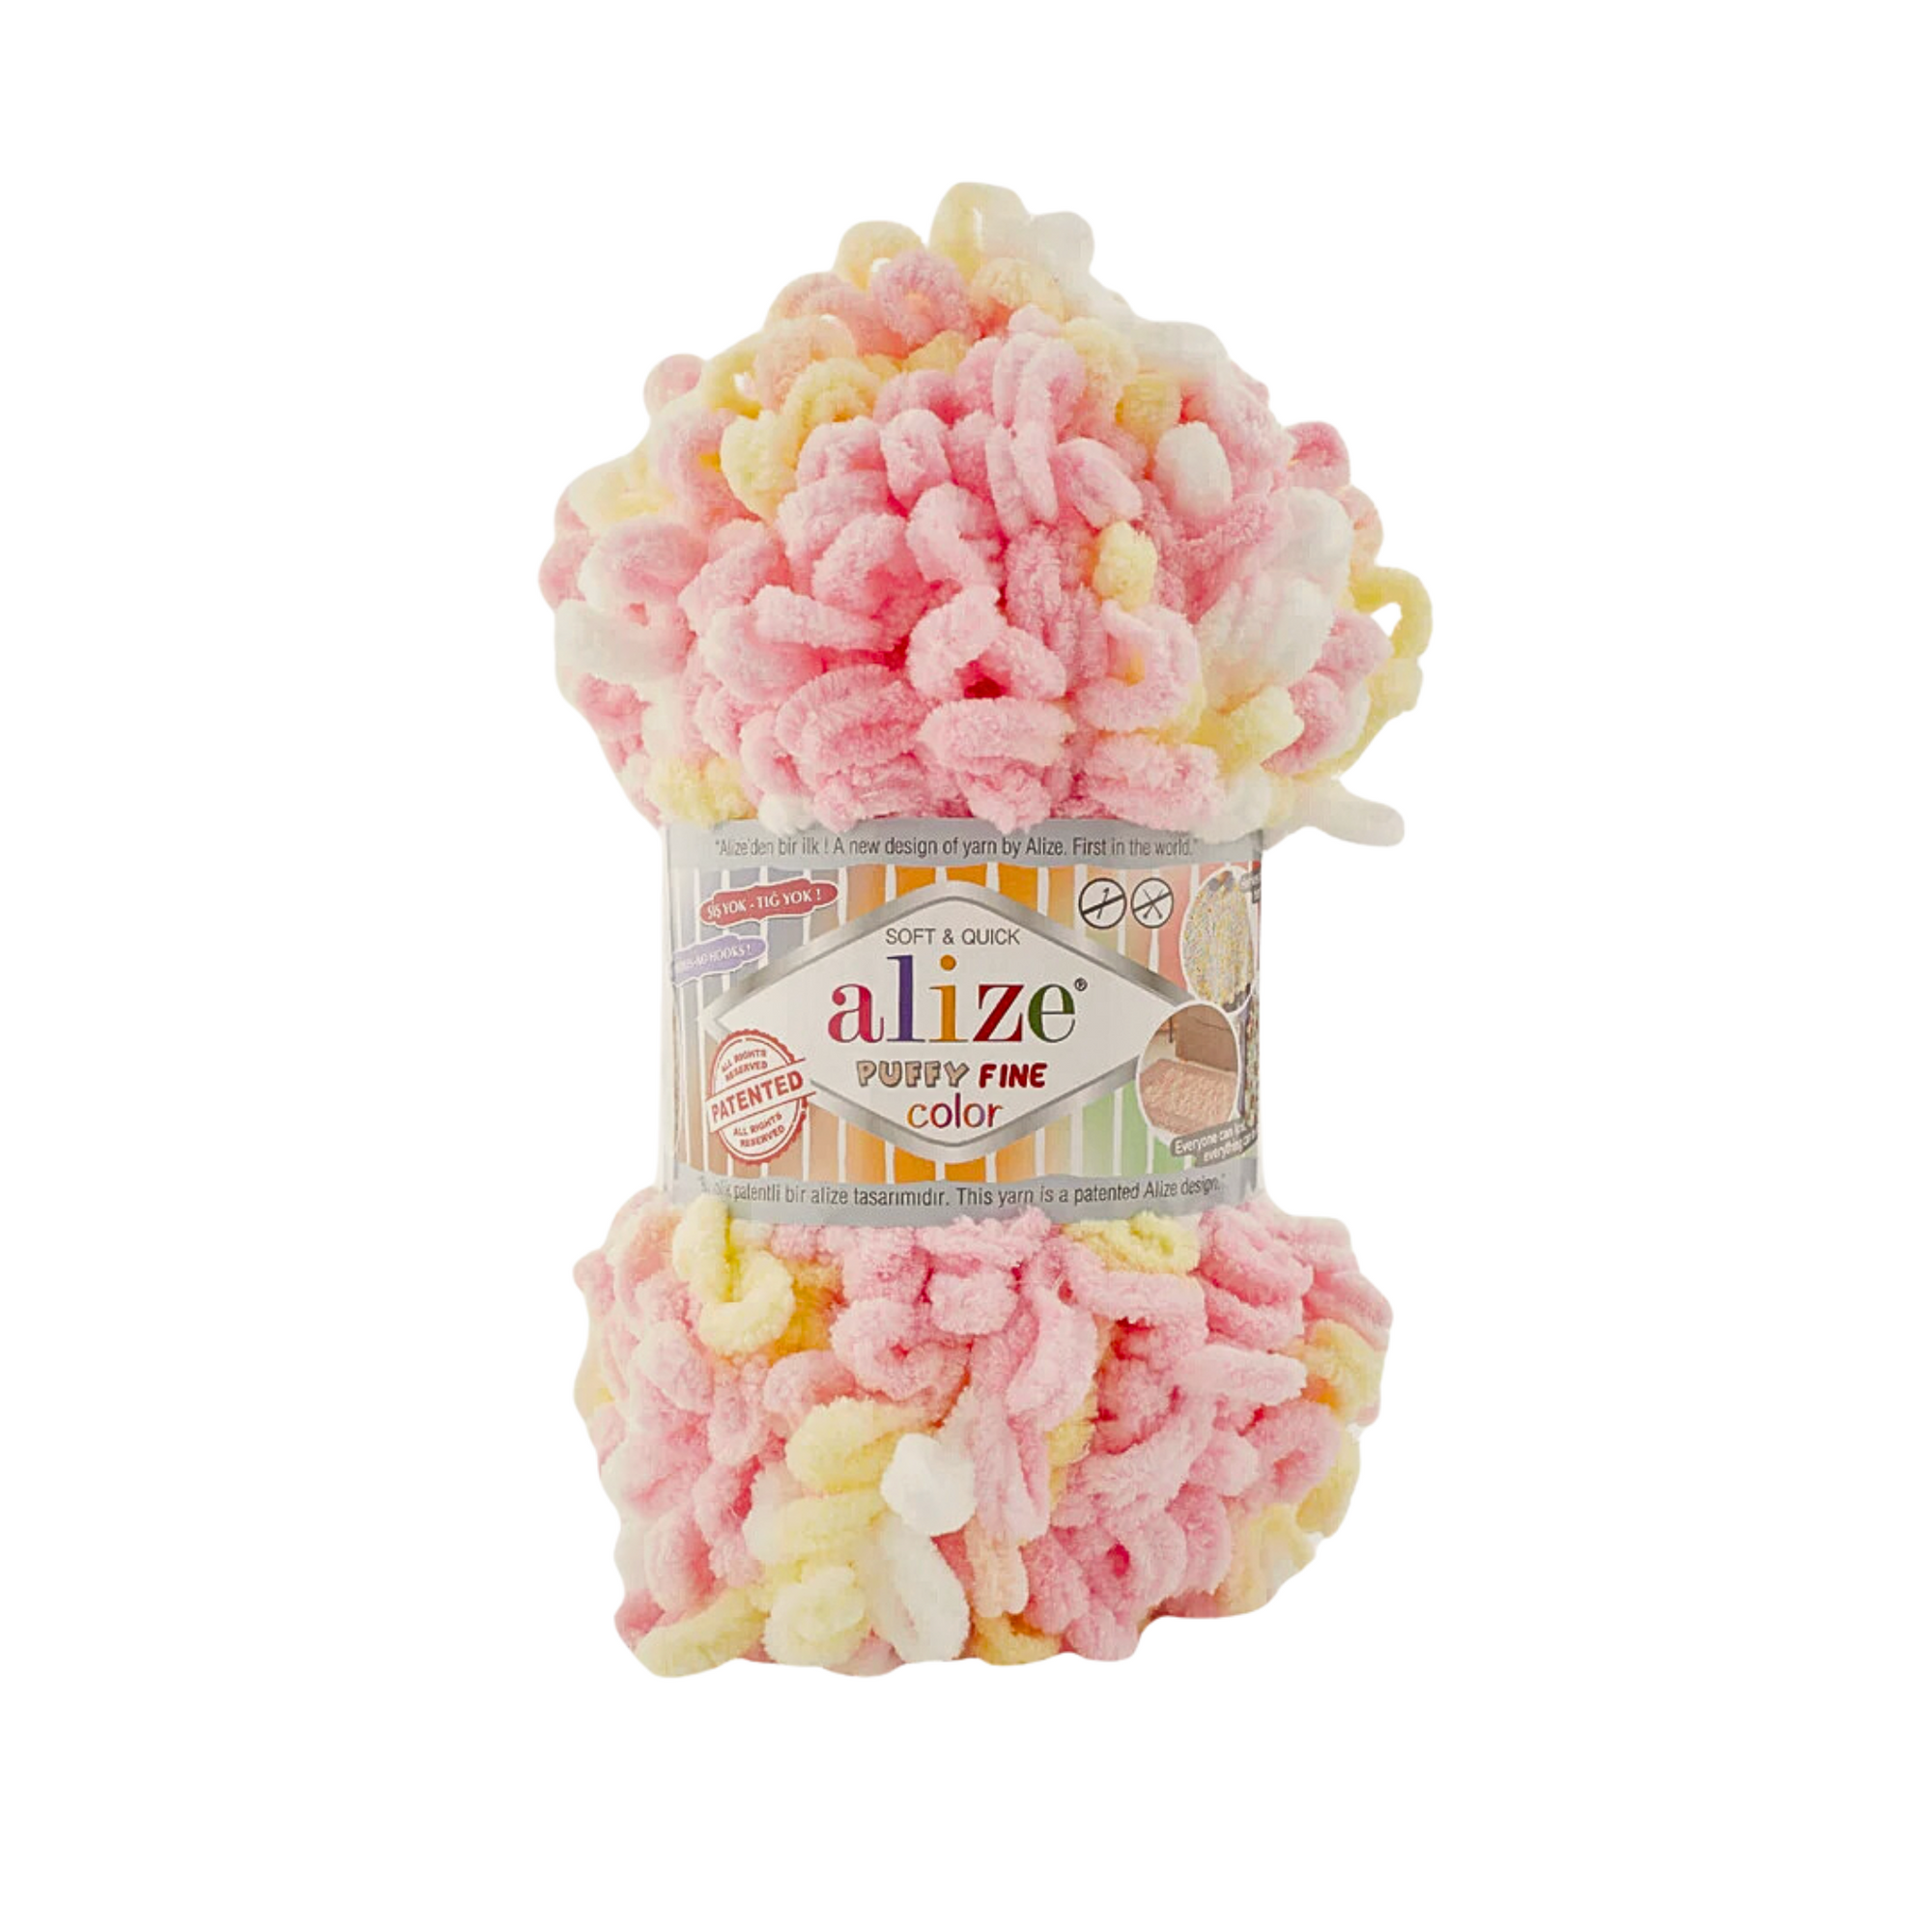 Alize Puffy Fine 100g, Baby Pink & Yellow & White - 6367